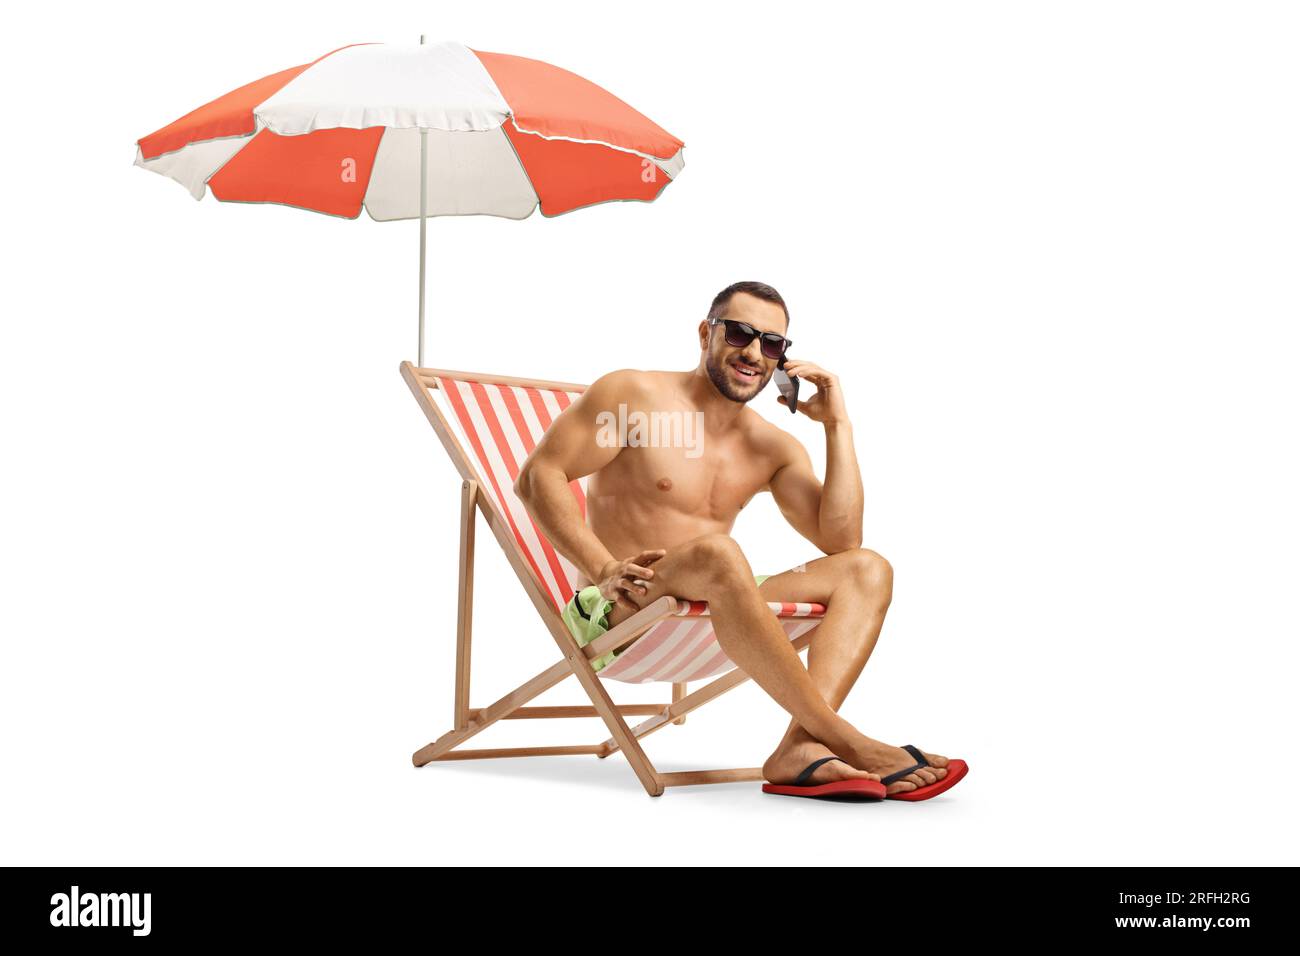 Man on a beach chair using a smartphone isolated on white background Stock Photo